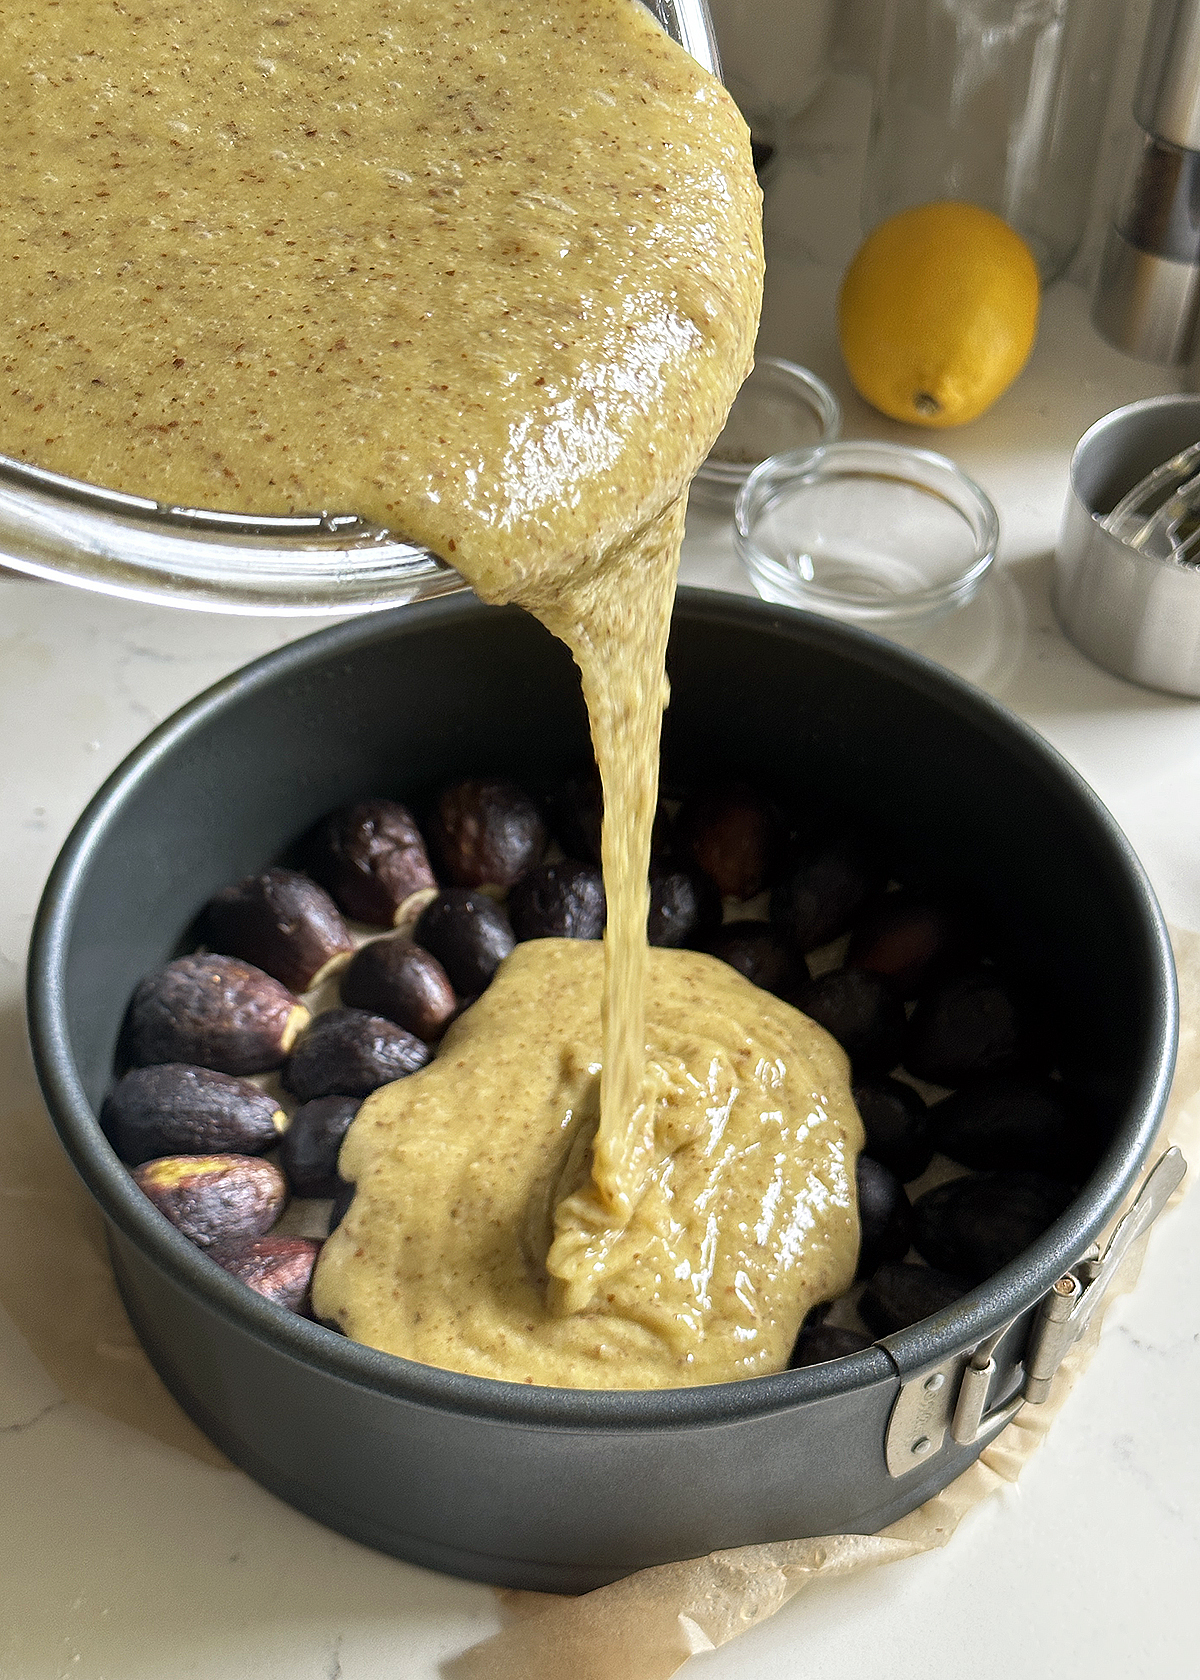 walnut olive oil cake batter pouring over figs into cake pan